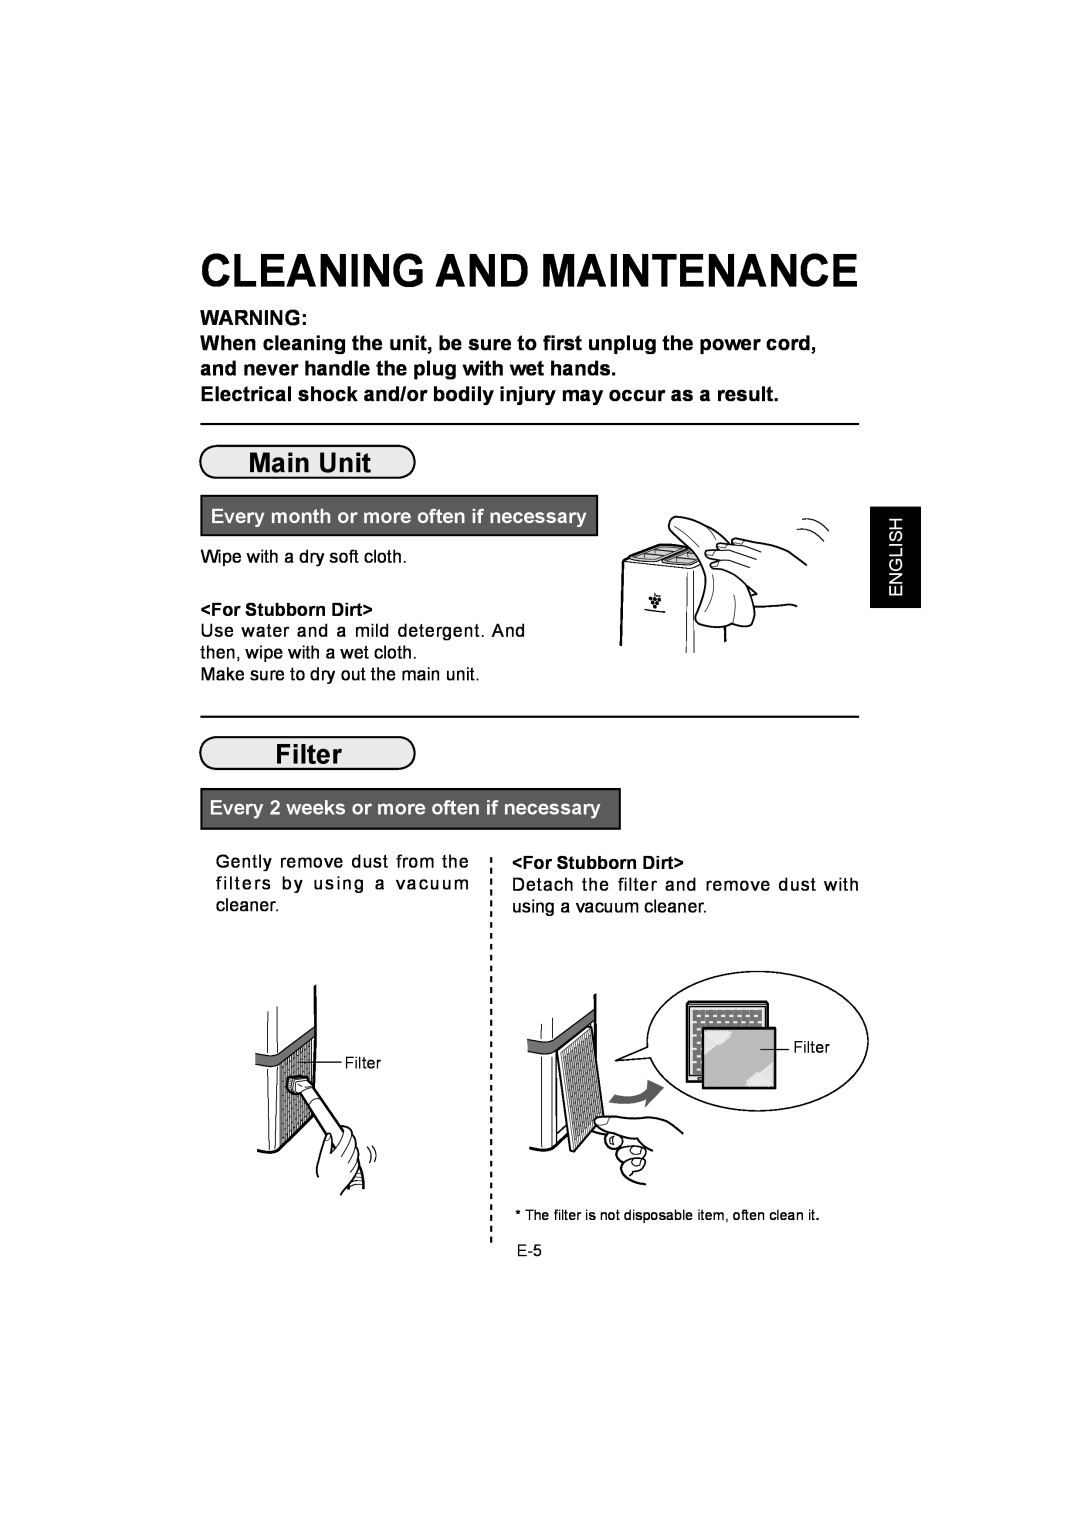 Sharp IG-A10E operation manual Cleaning And Maintenance, Main Unit, Filter, Every month or more often if necessary 